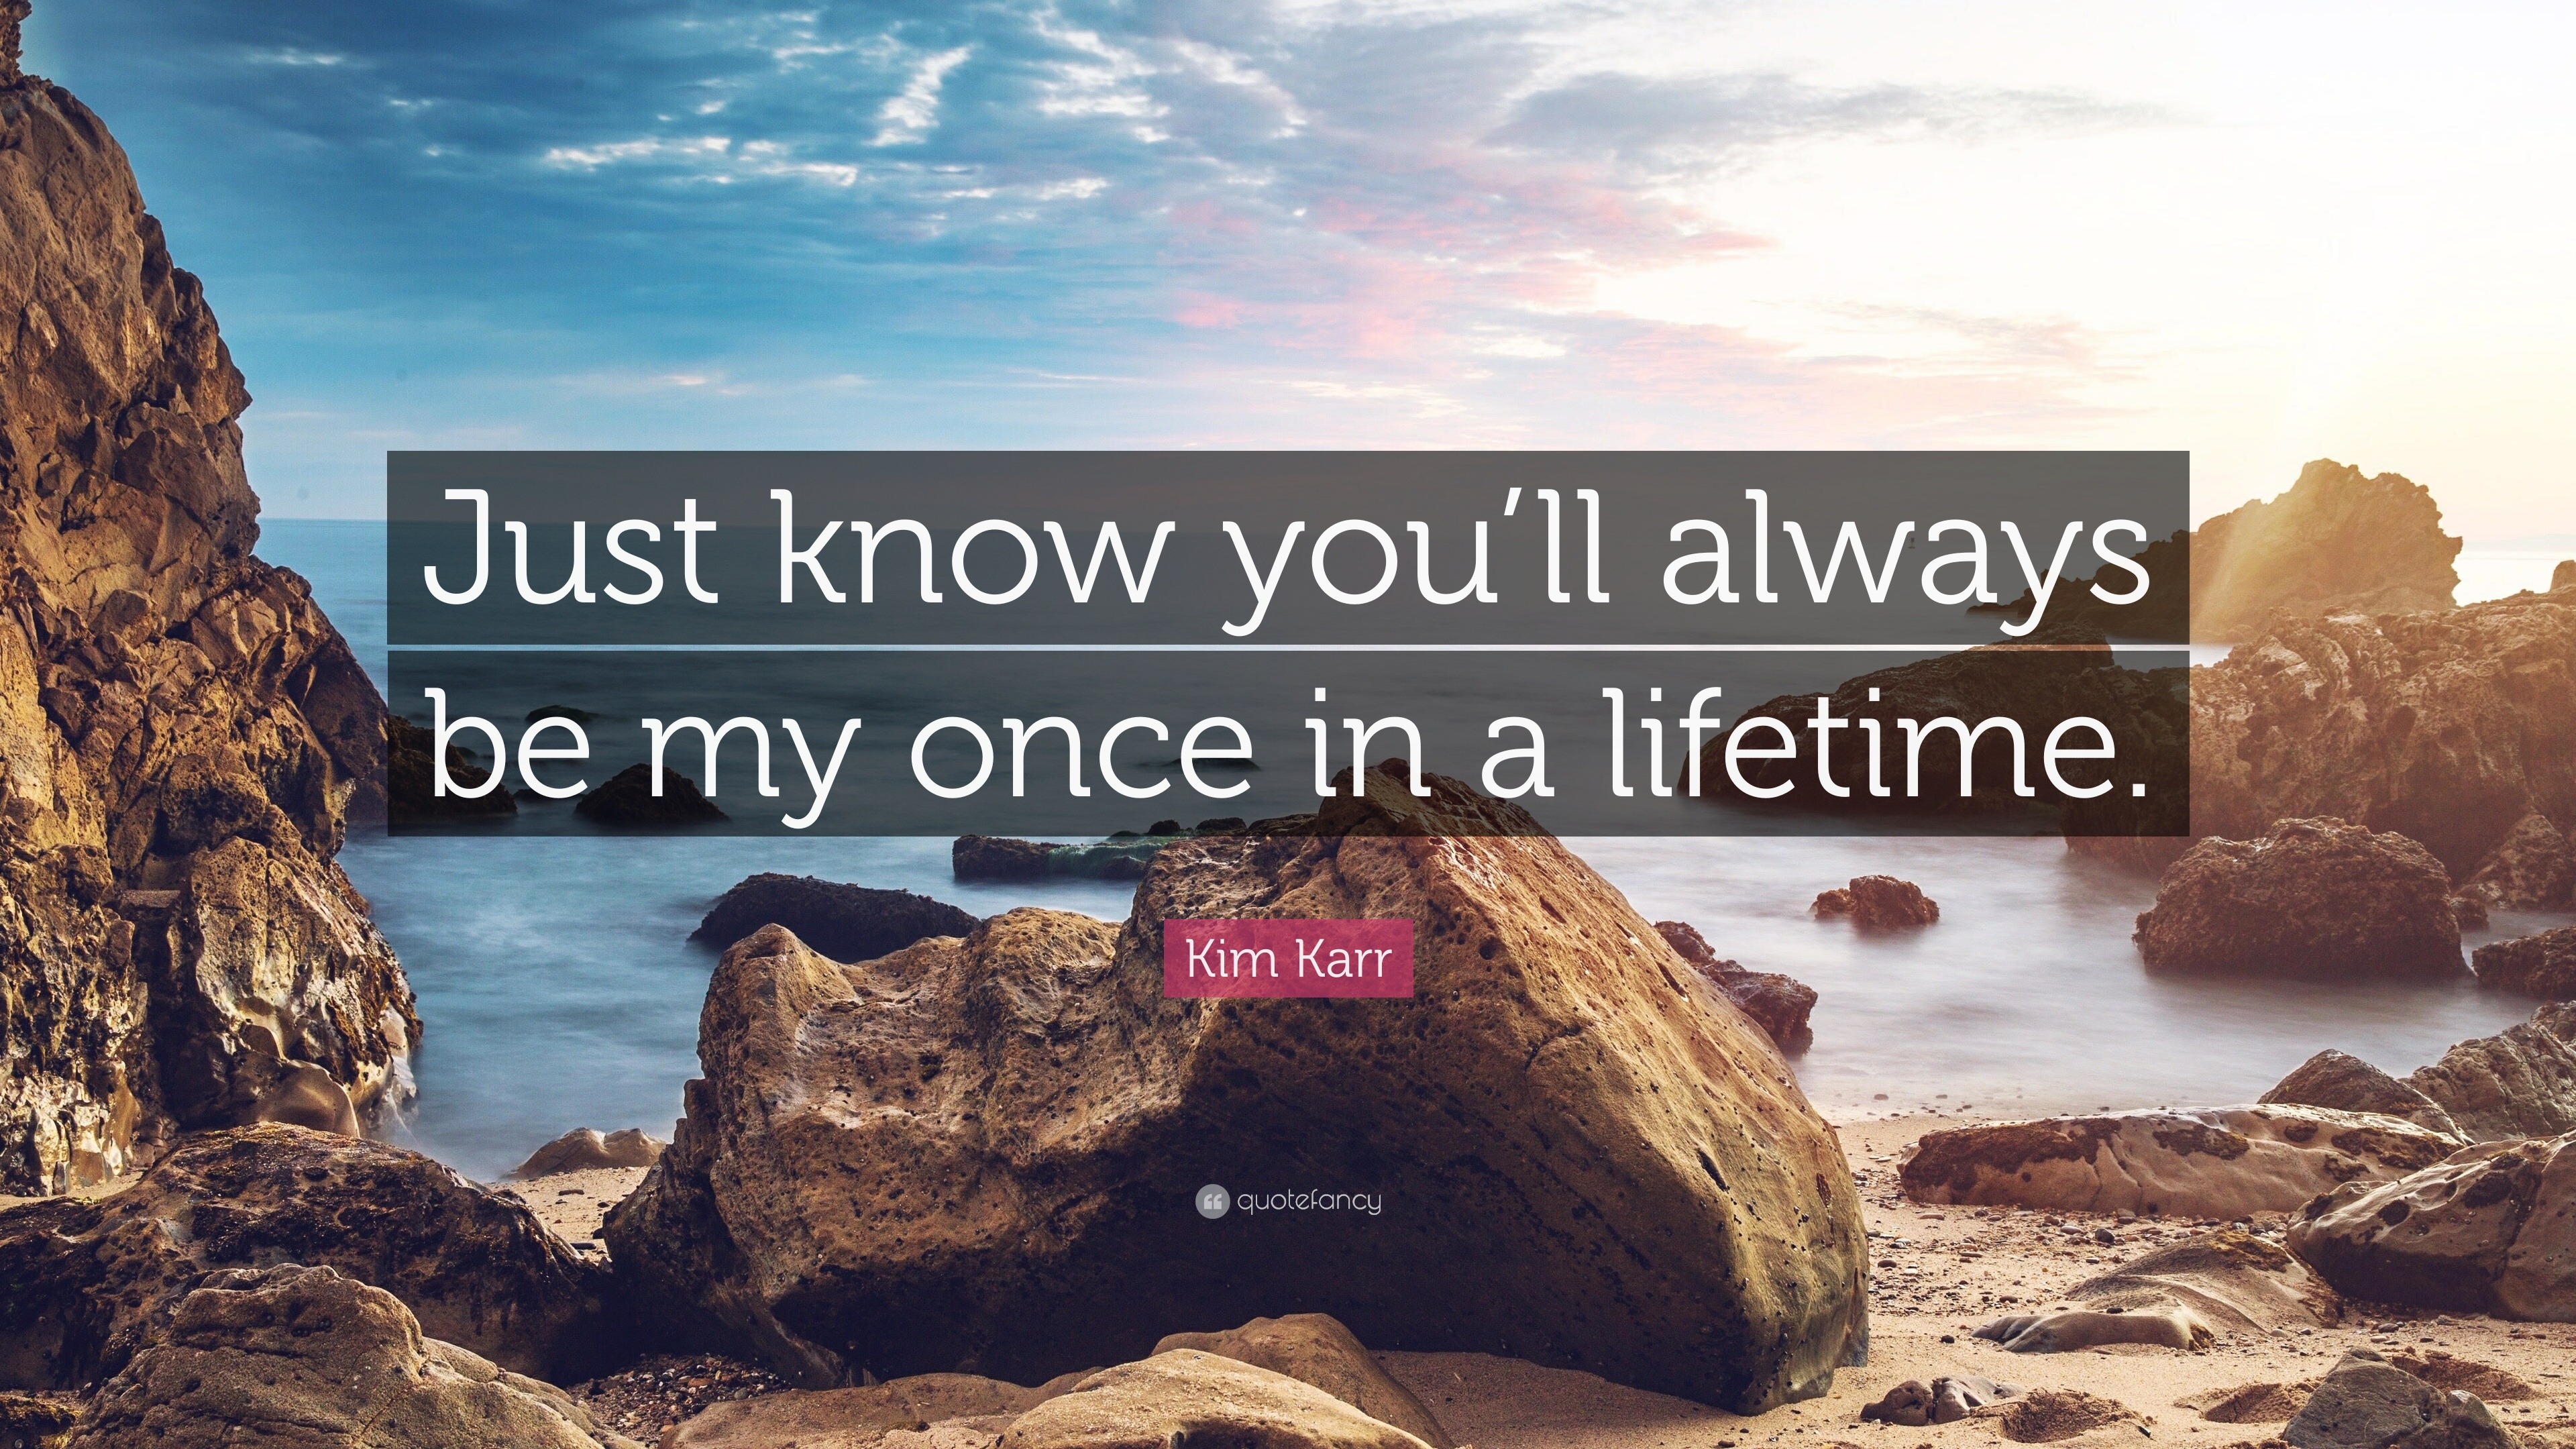 Kim Karr Quote: “Just know you’ll always be my once in a lifetime.”